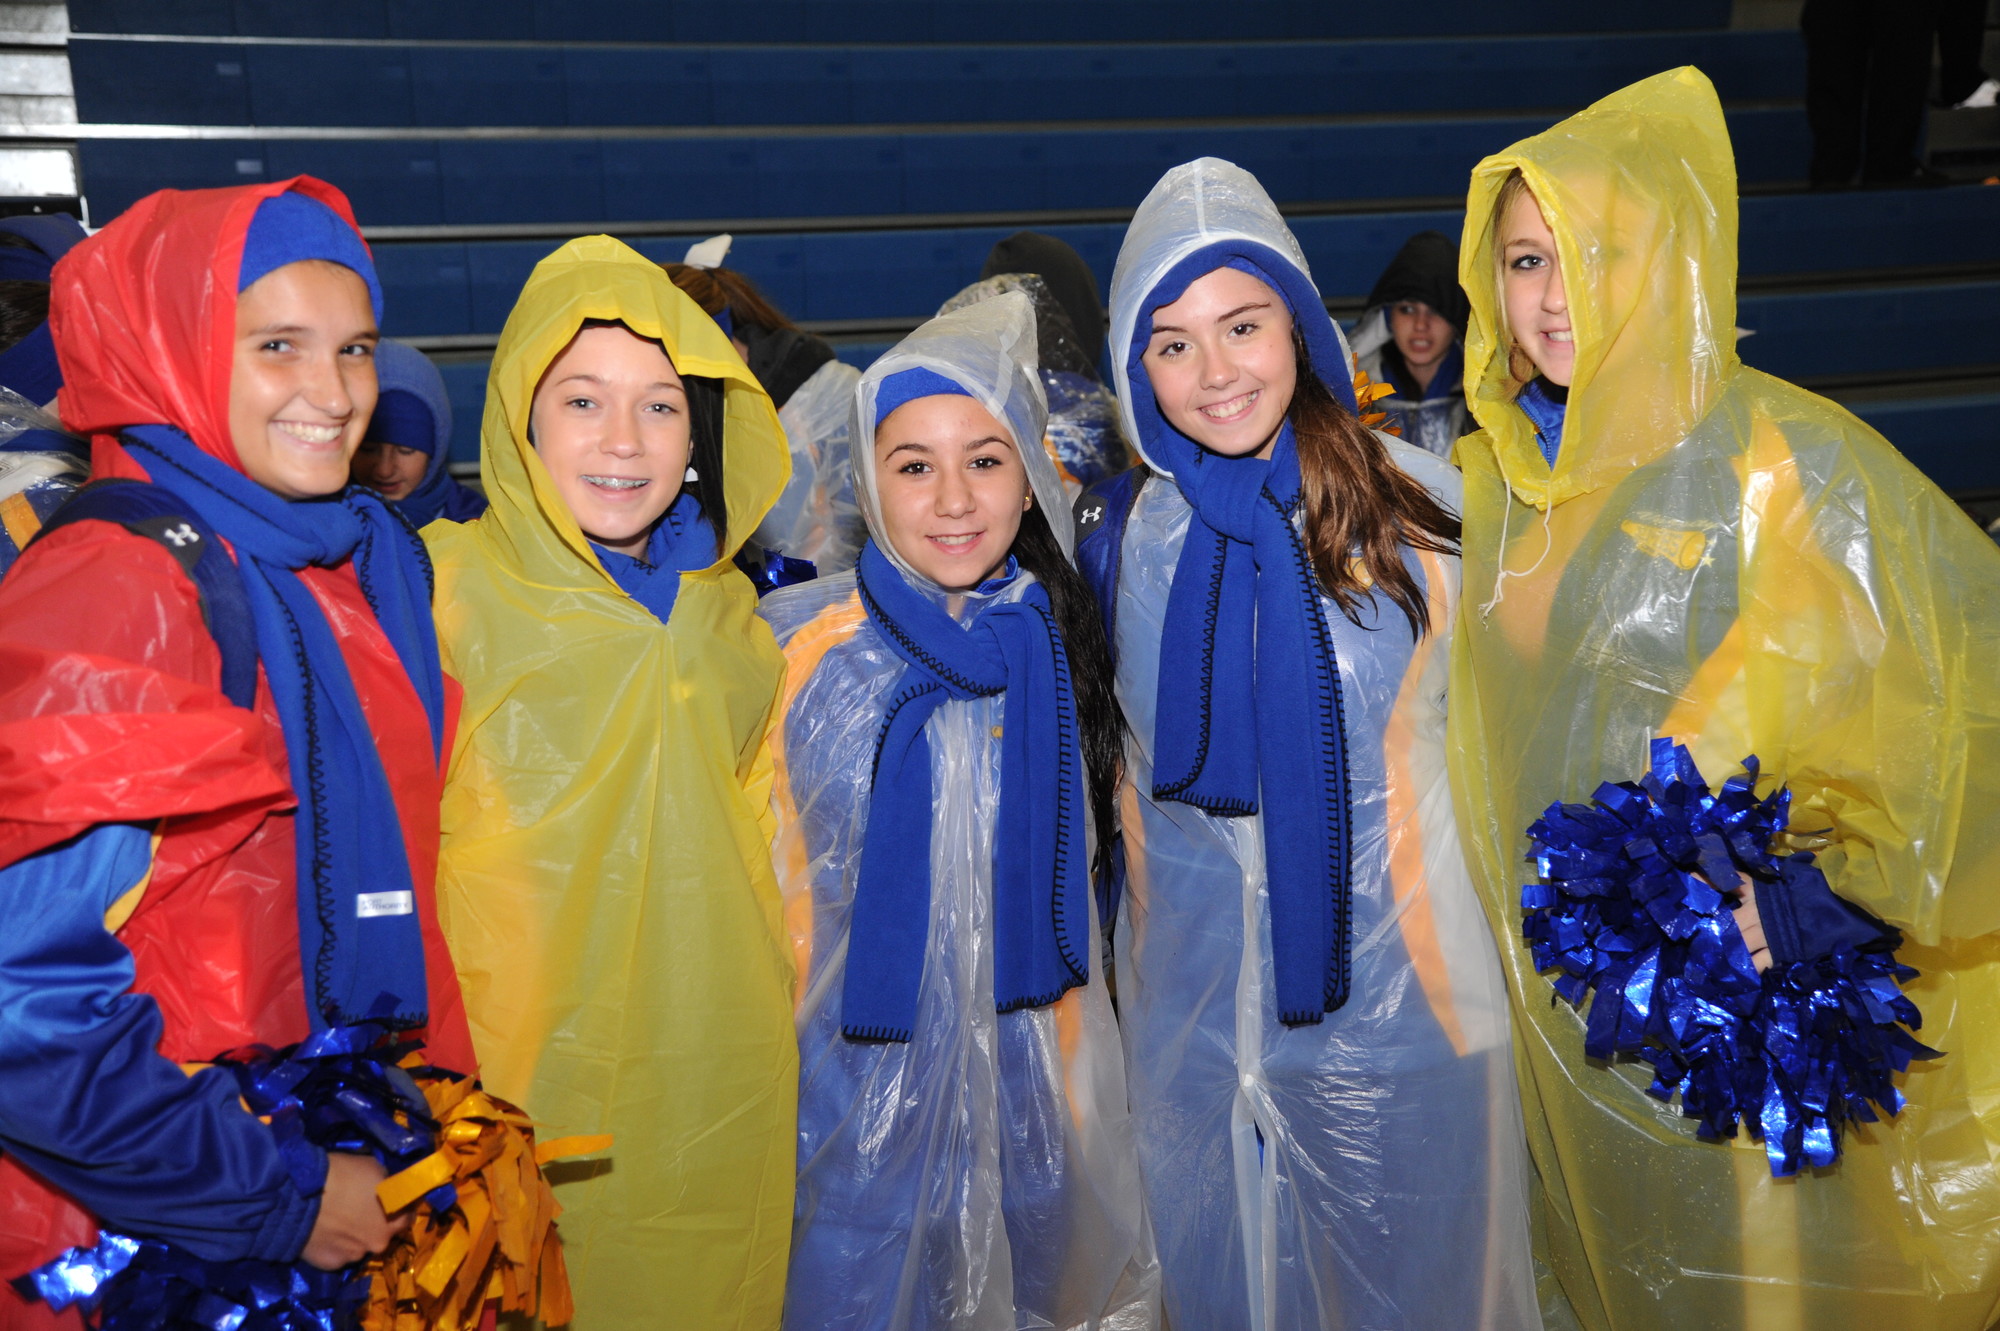 Nikki Donohue, Taylor Foster, Ashley Luna, Nicole Pupo, and Frankie Kahl were prepared for the rainy weather.